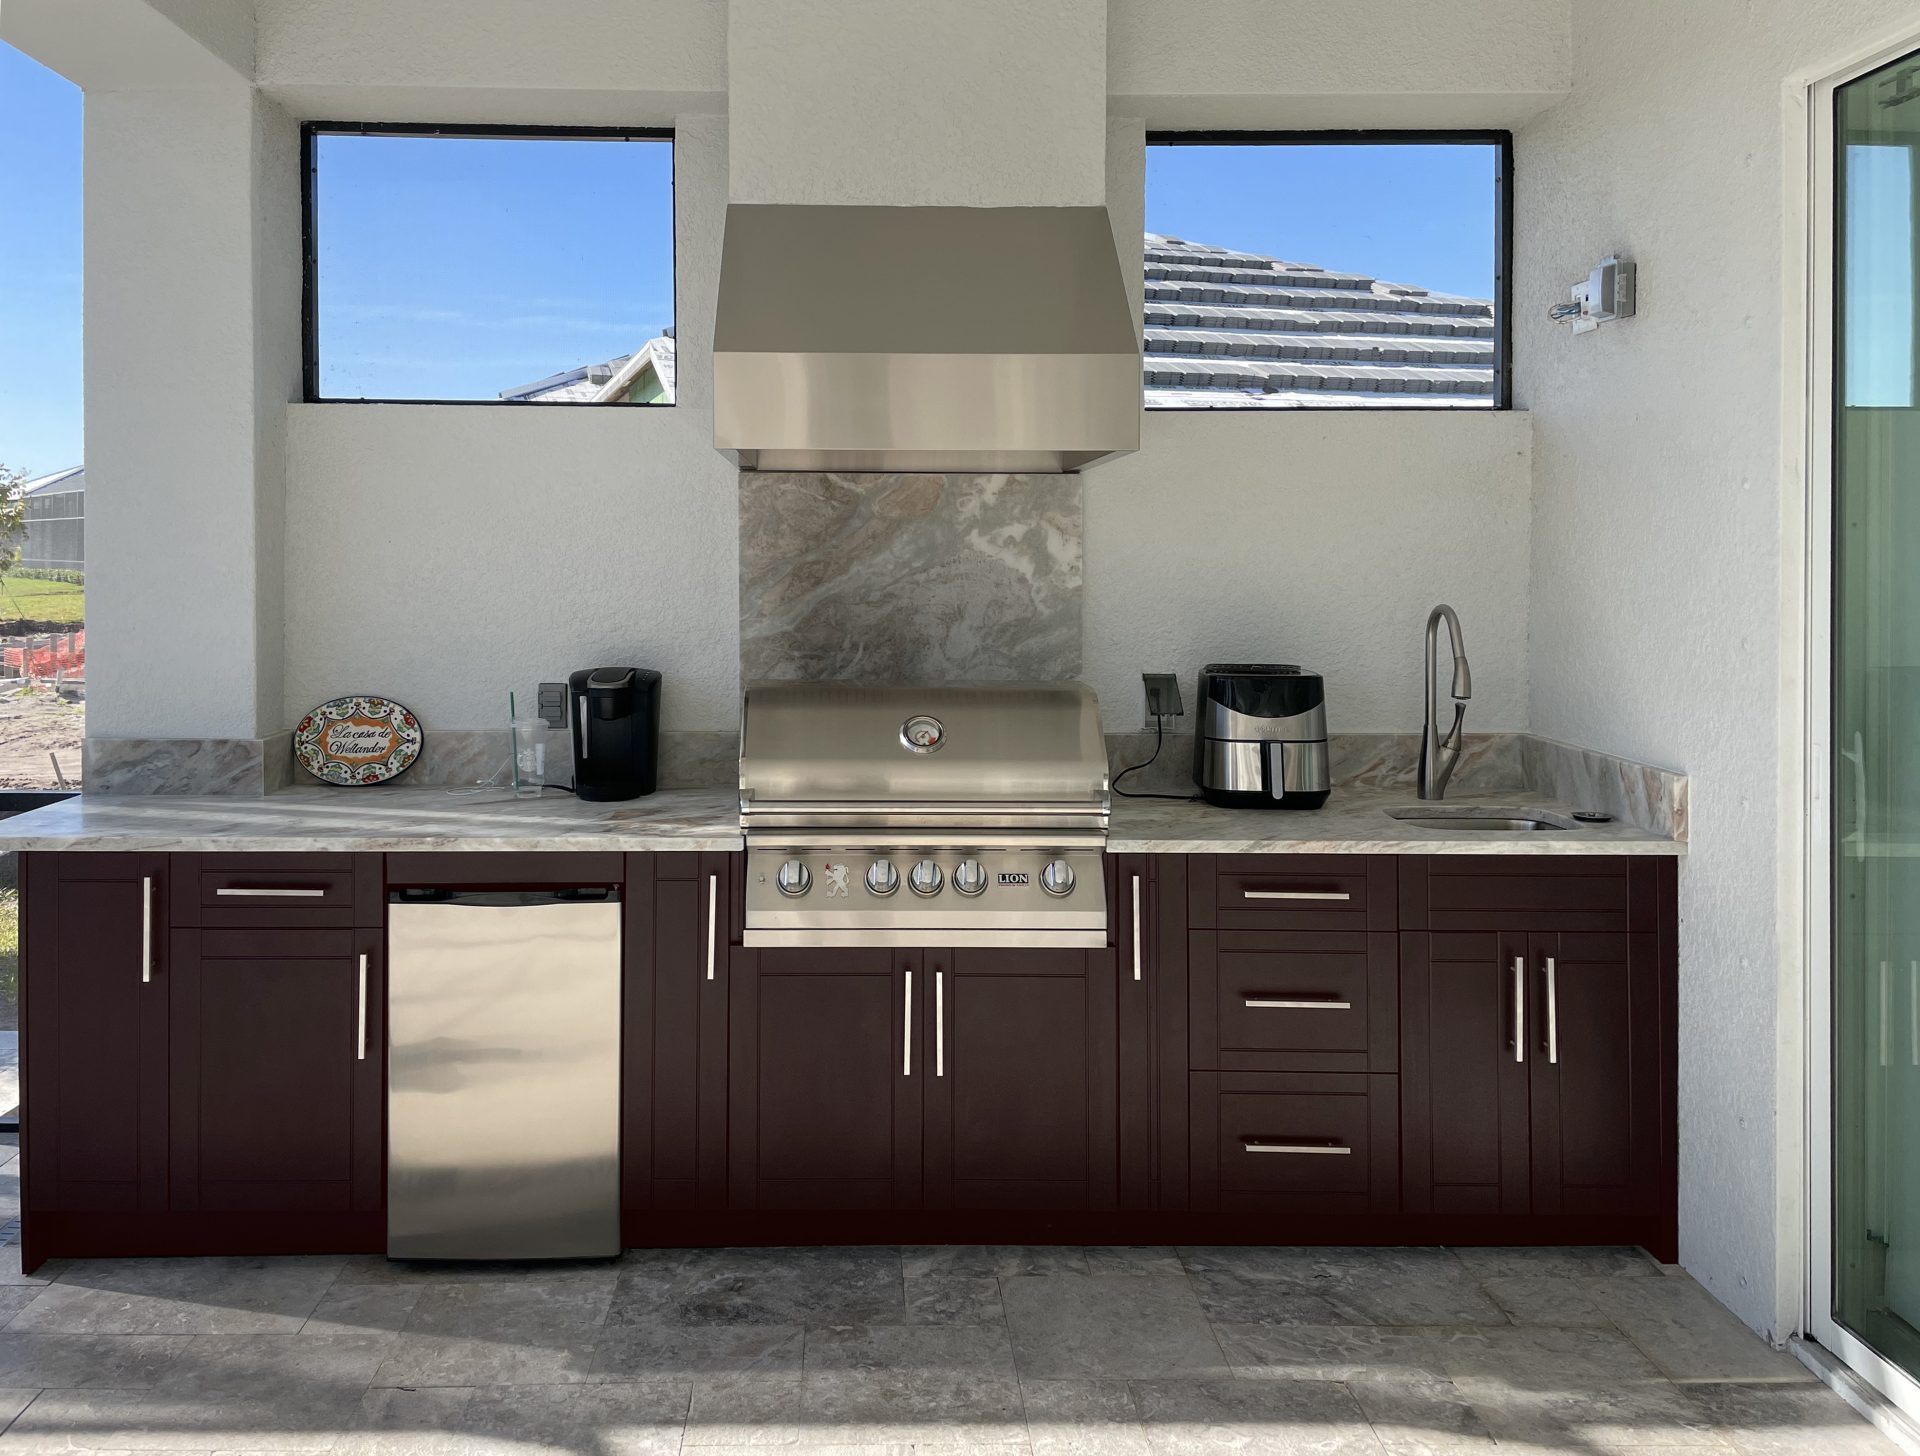 OUTDOOR KITCHEN 33. Custom outdoor kitchen in Lakewood Ranch, FL. Kitchen features dark brown, shaker style cabinets. Appliances include Lion grill, Tradewind outdoor hood, stucco hood chase and Blaze stainless front refrigerator & bar pulls.